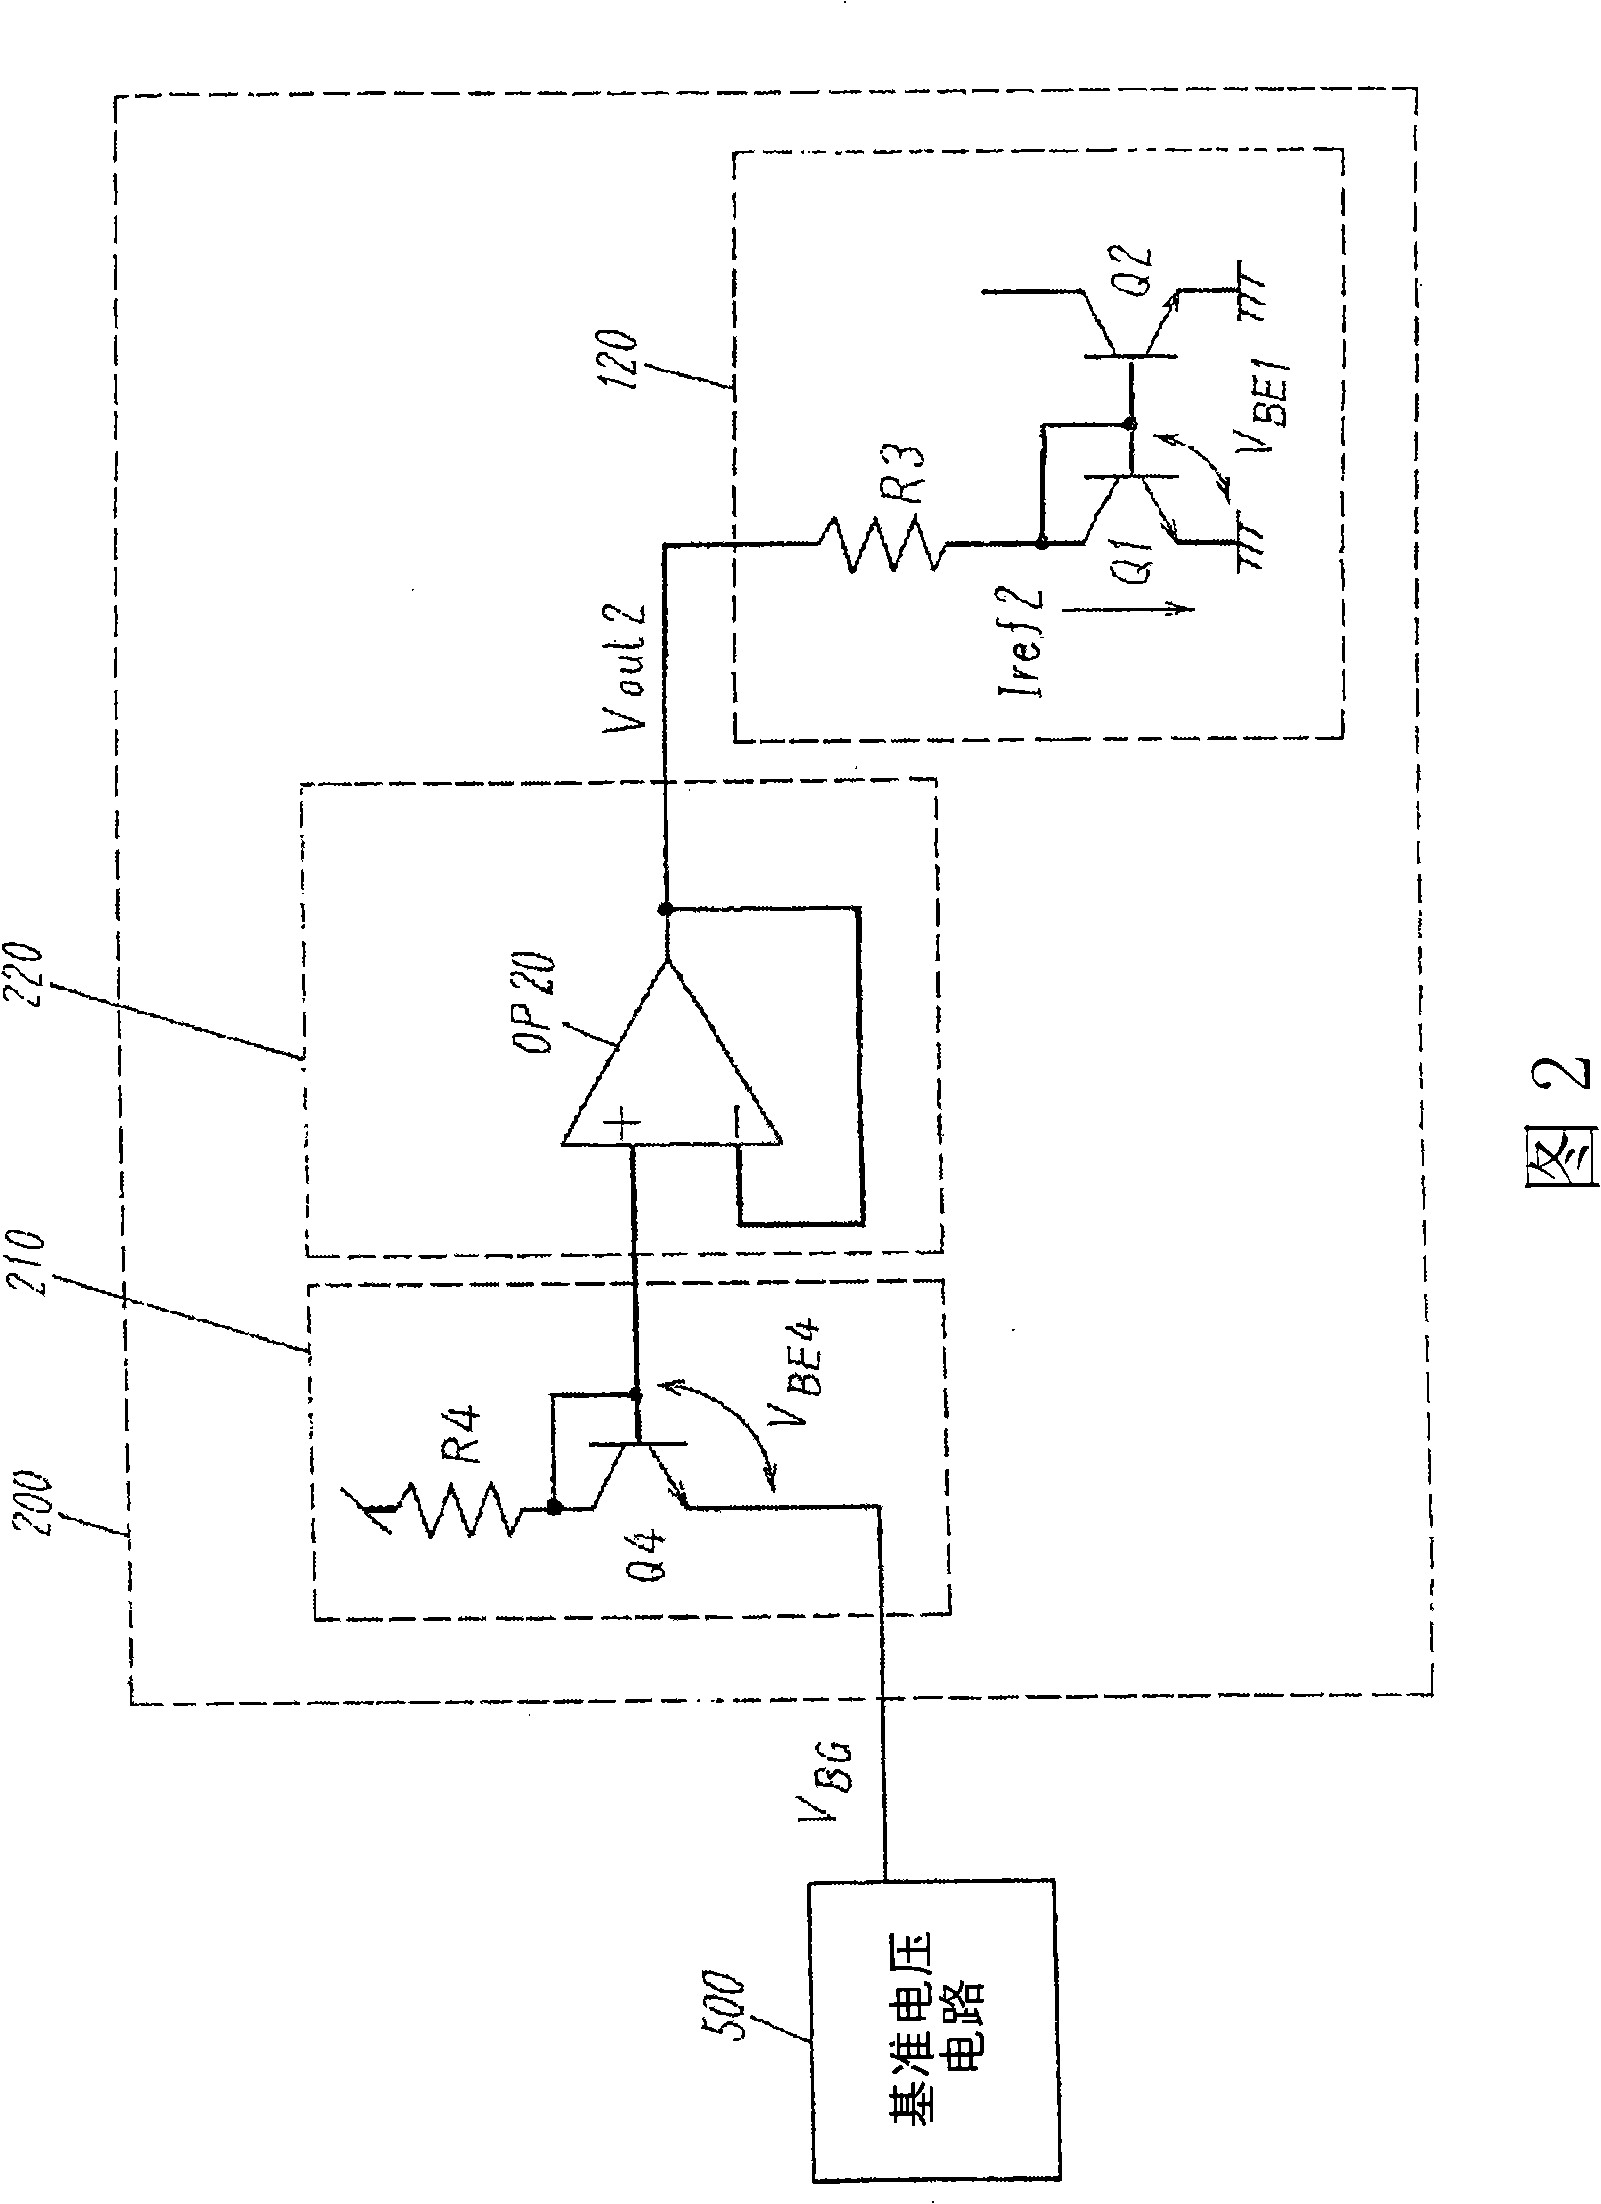 Reference current circuit